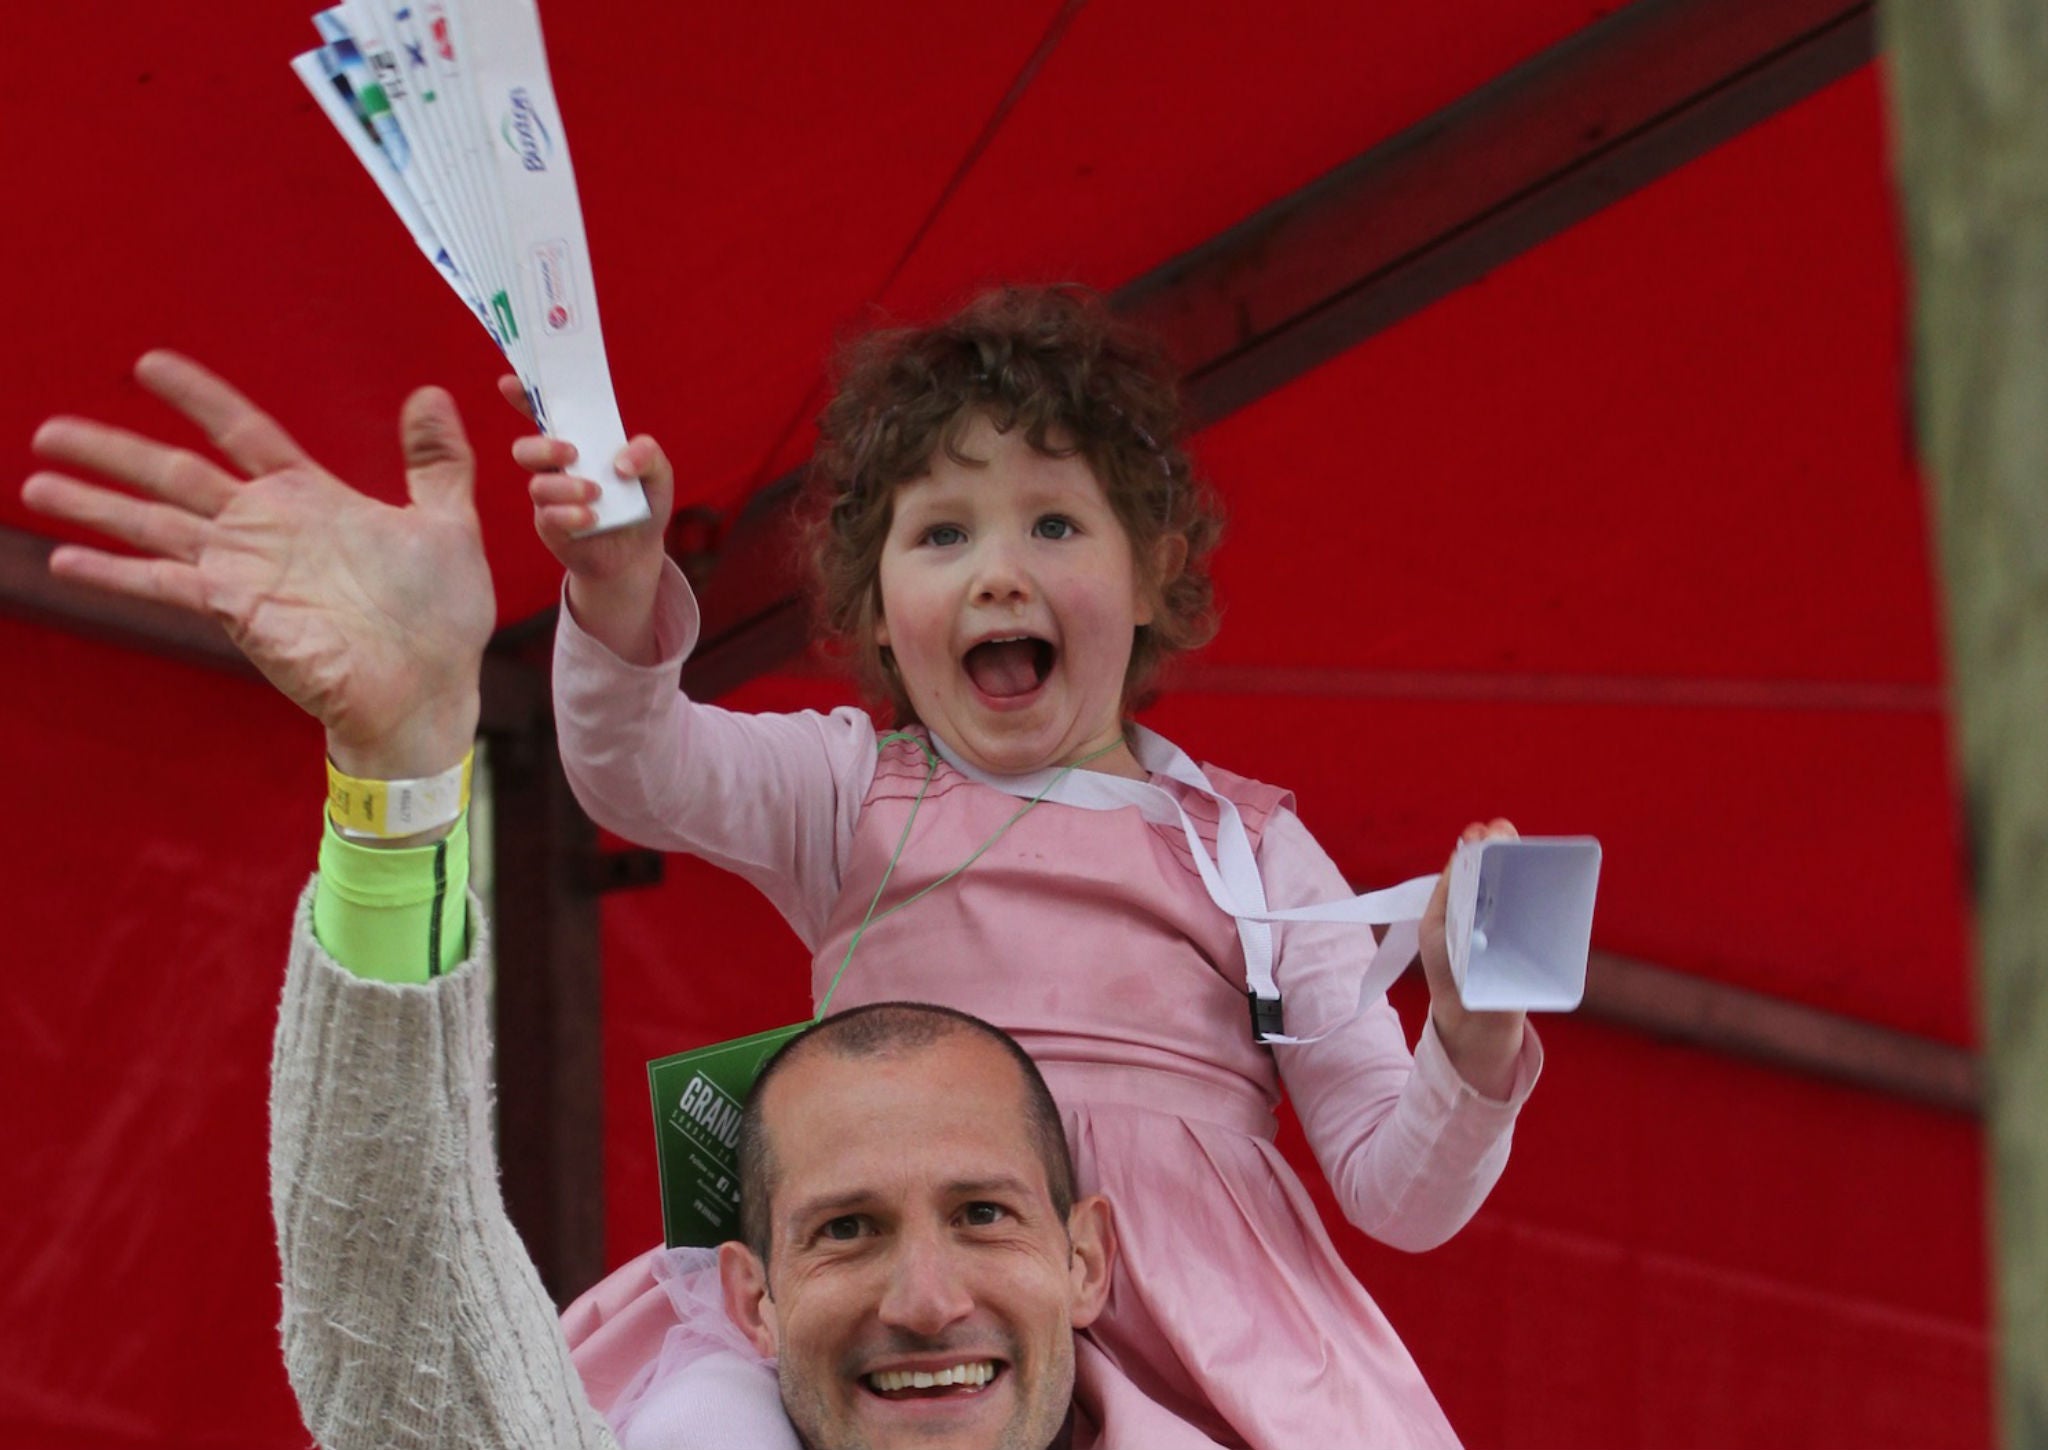 Millie cheers on her mother while she finishes the 2015 London Marathon